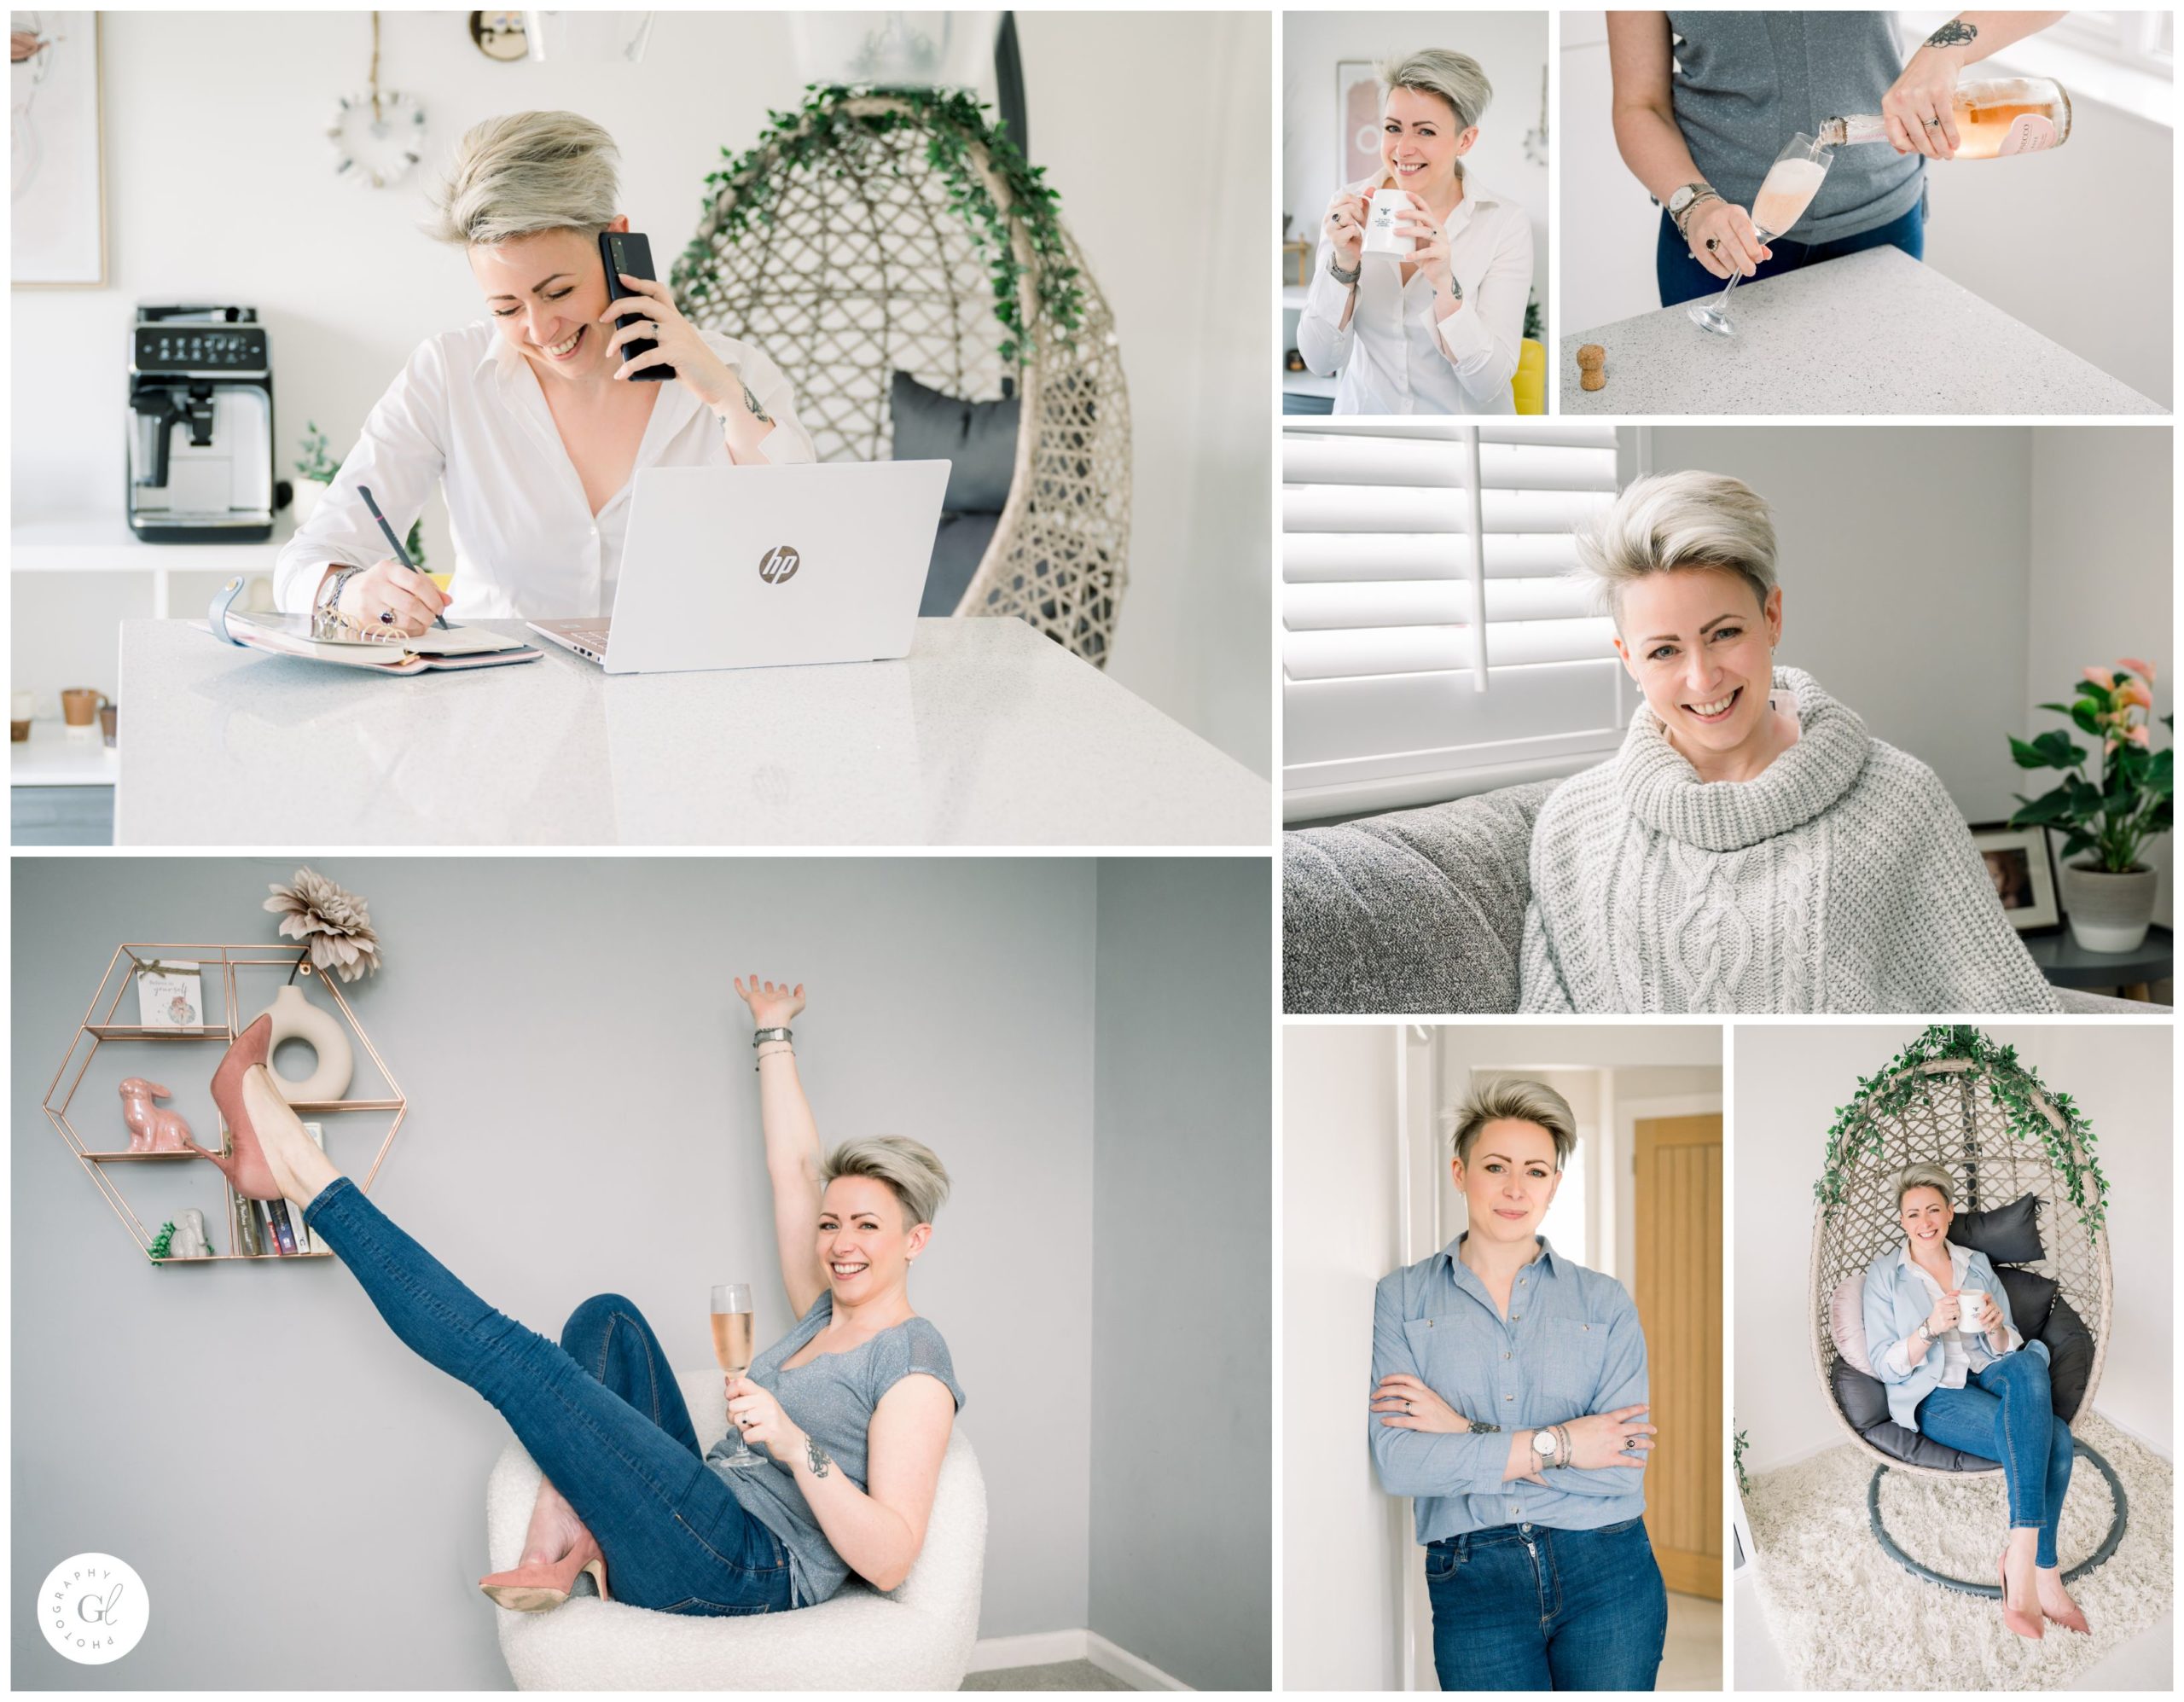 Selection of brand images of a woman with short blond hair in various poses in her home